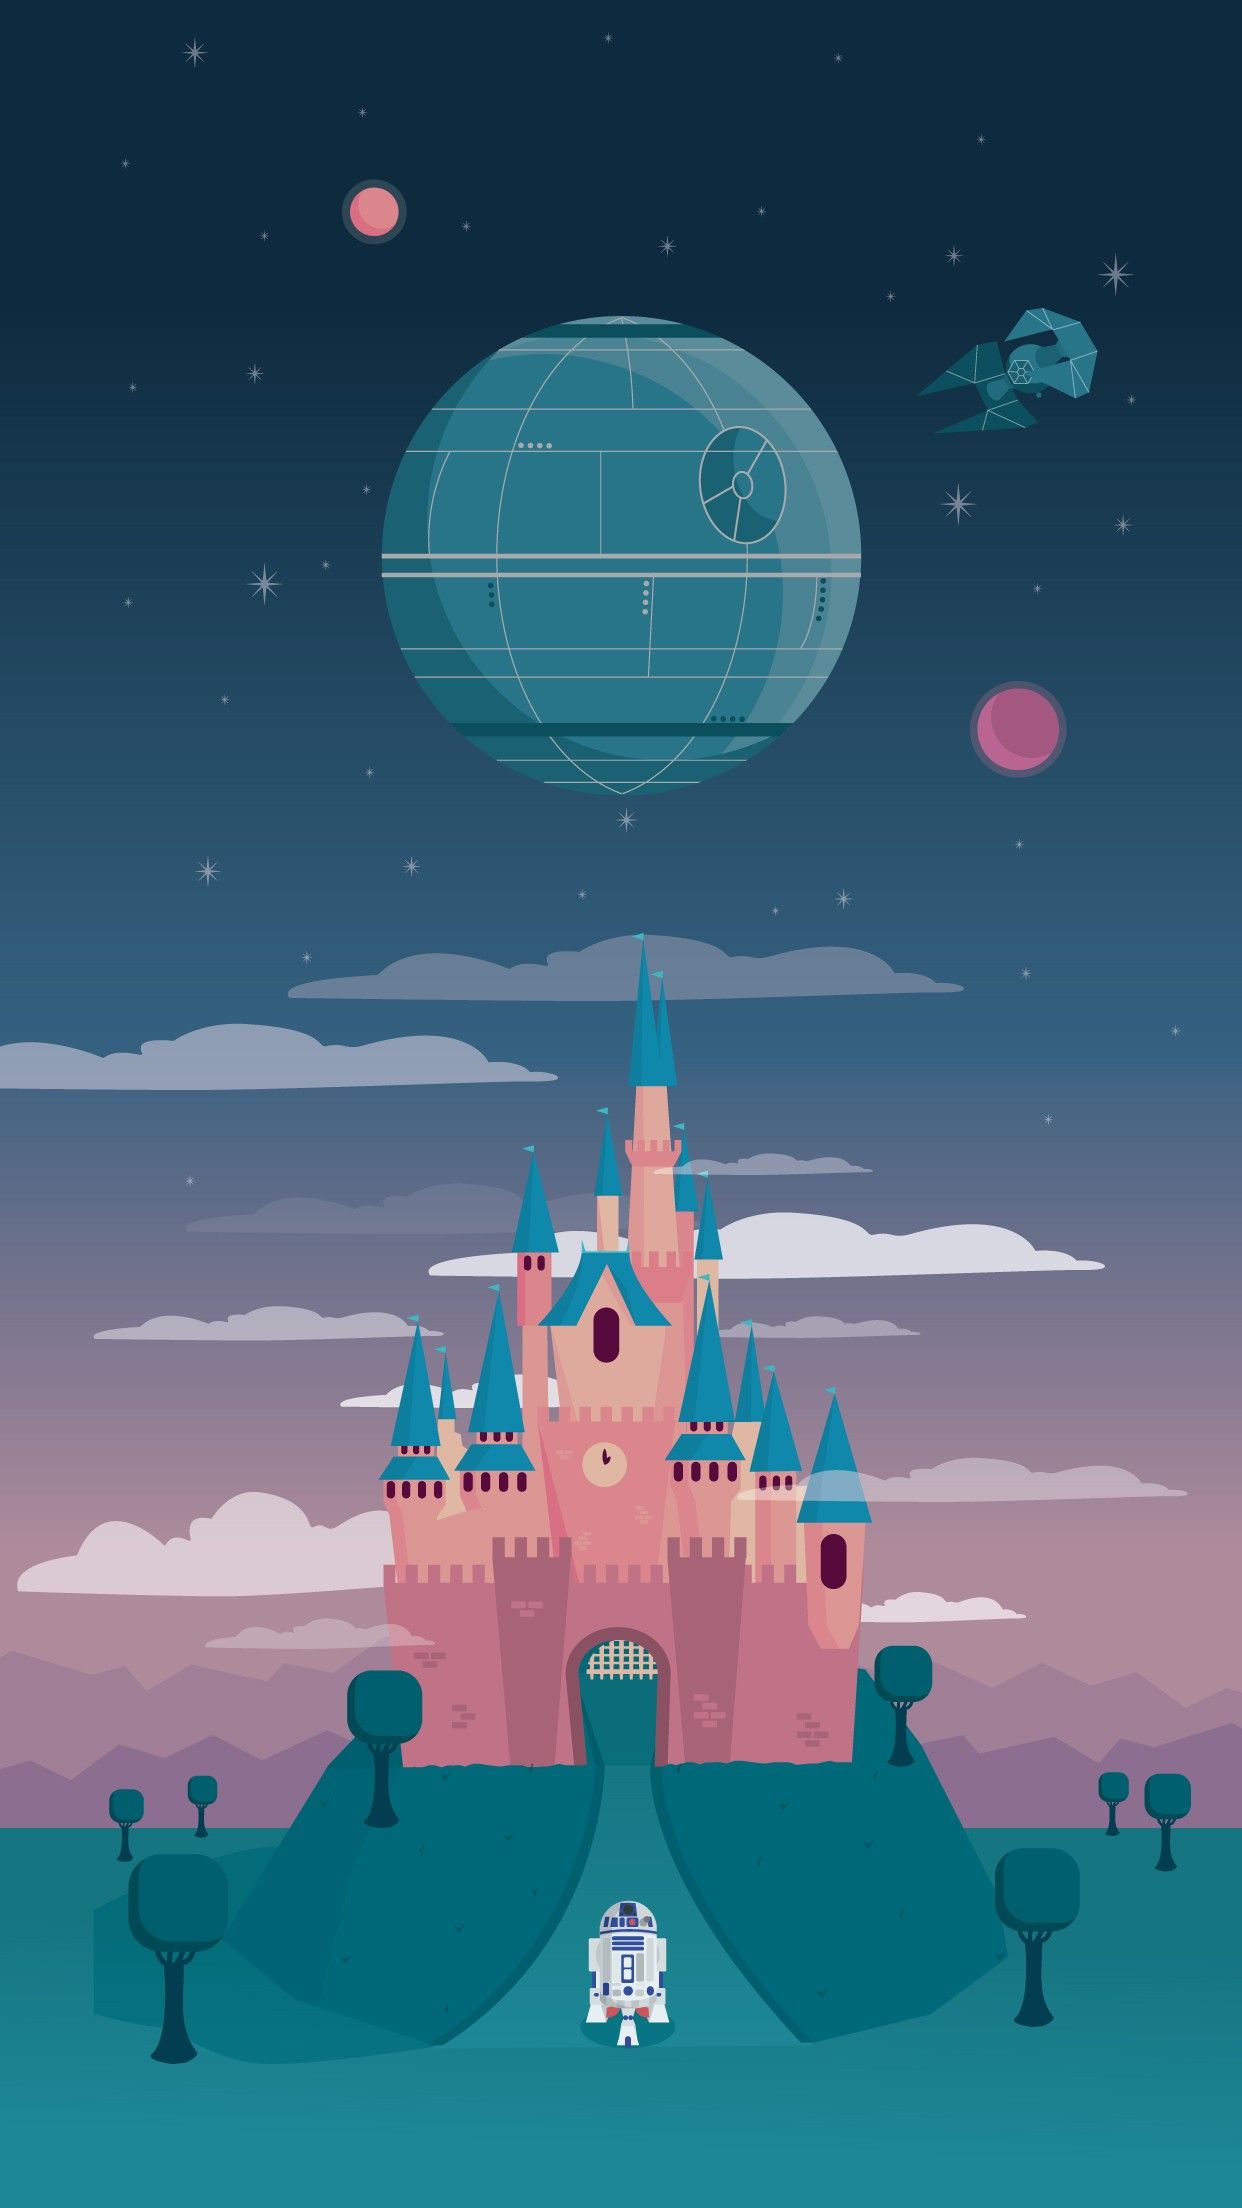 iPhone Disney Best Quality Wallpapers 7407 - HD Wallpapers Site